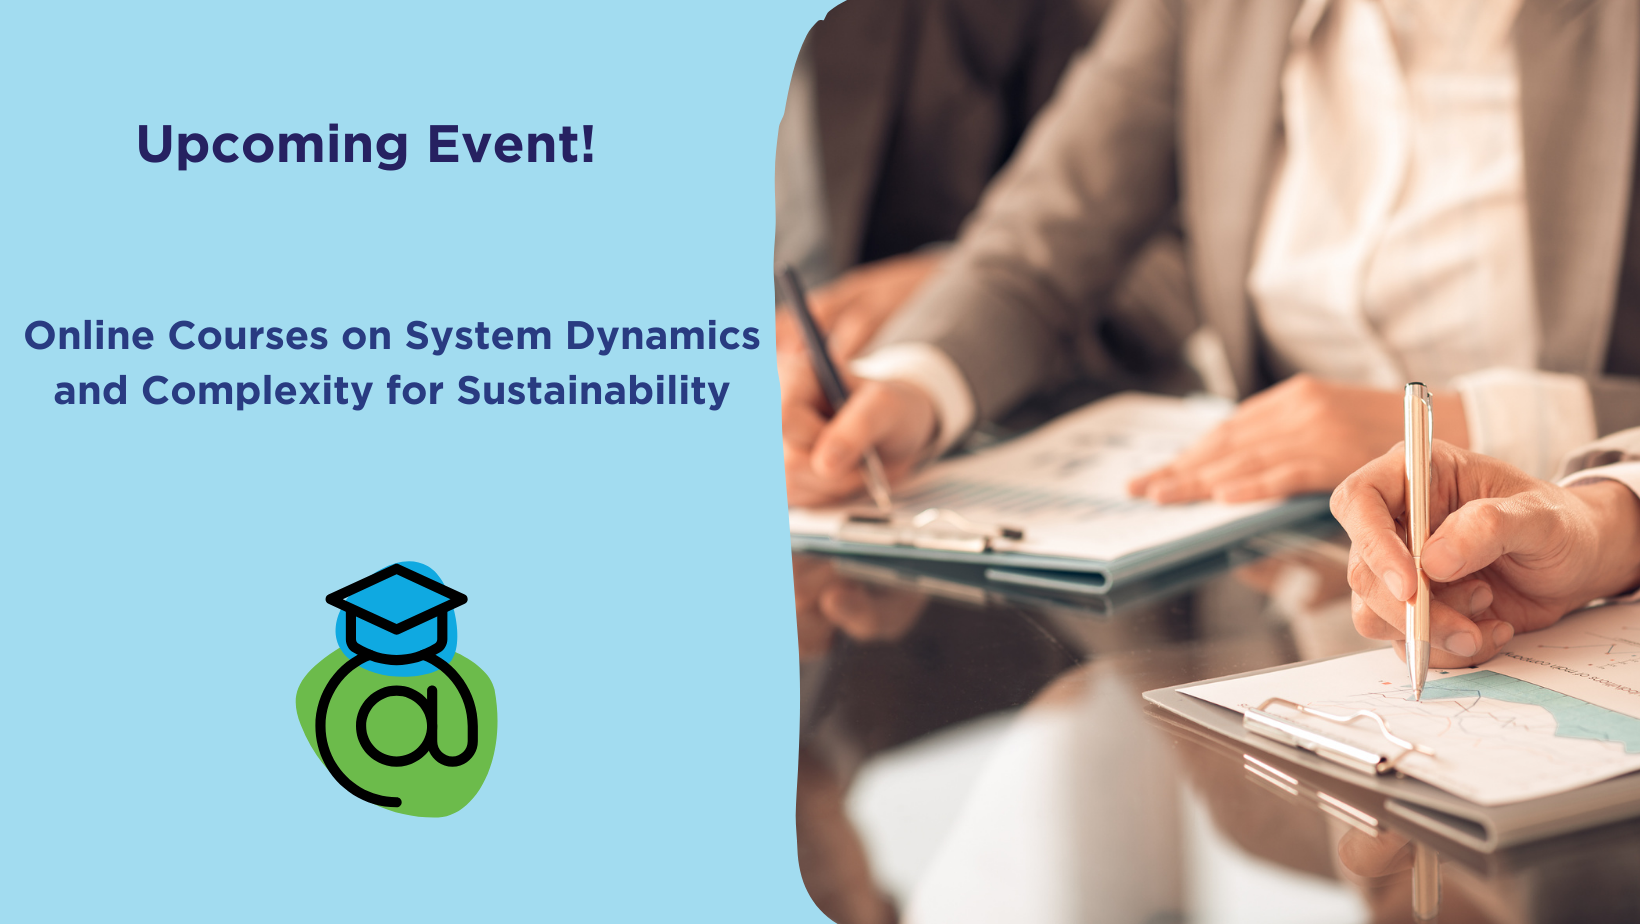 Upcoming Event! Courses on System Dynamics and Complexity for Sustainability 